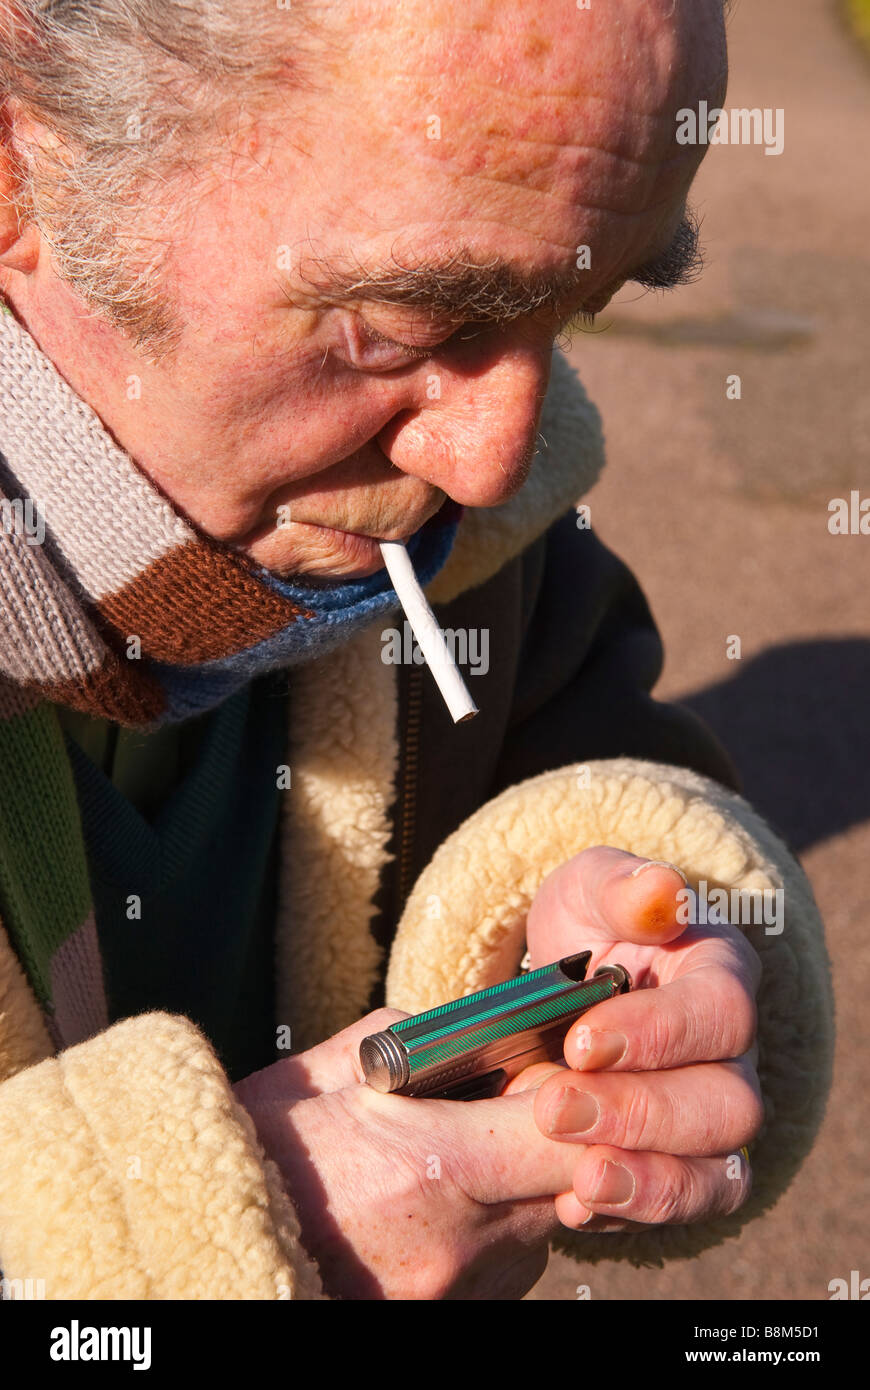 Elderly man lighting his roll up cigarette outdoors ready for smoking Stock Photo